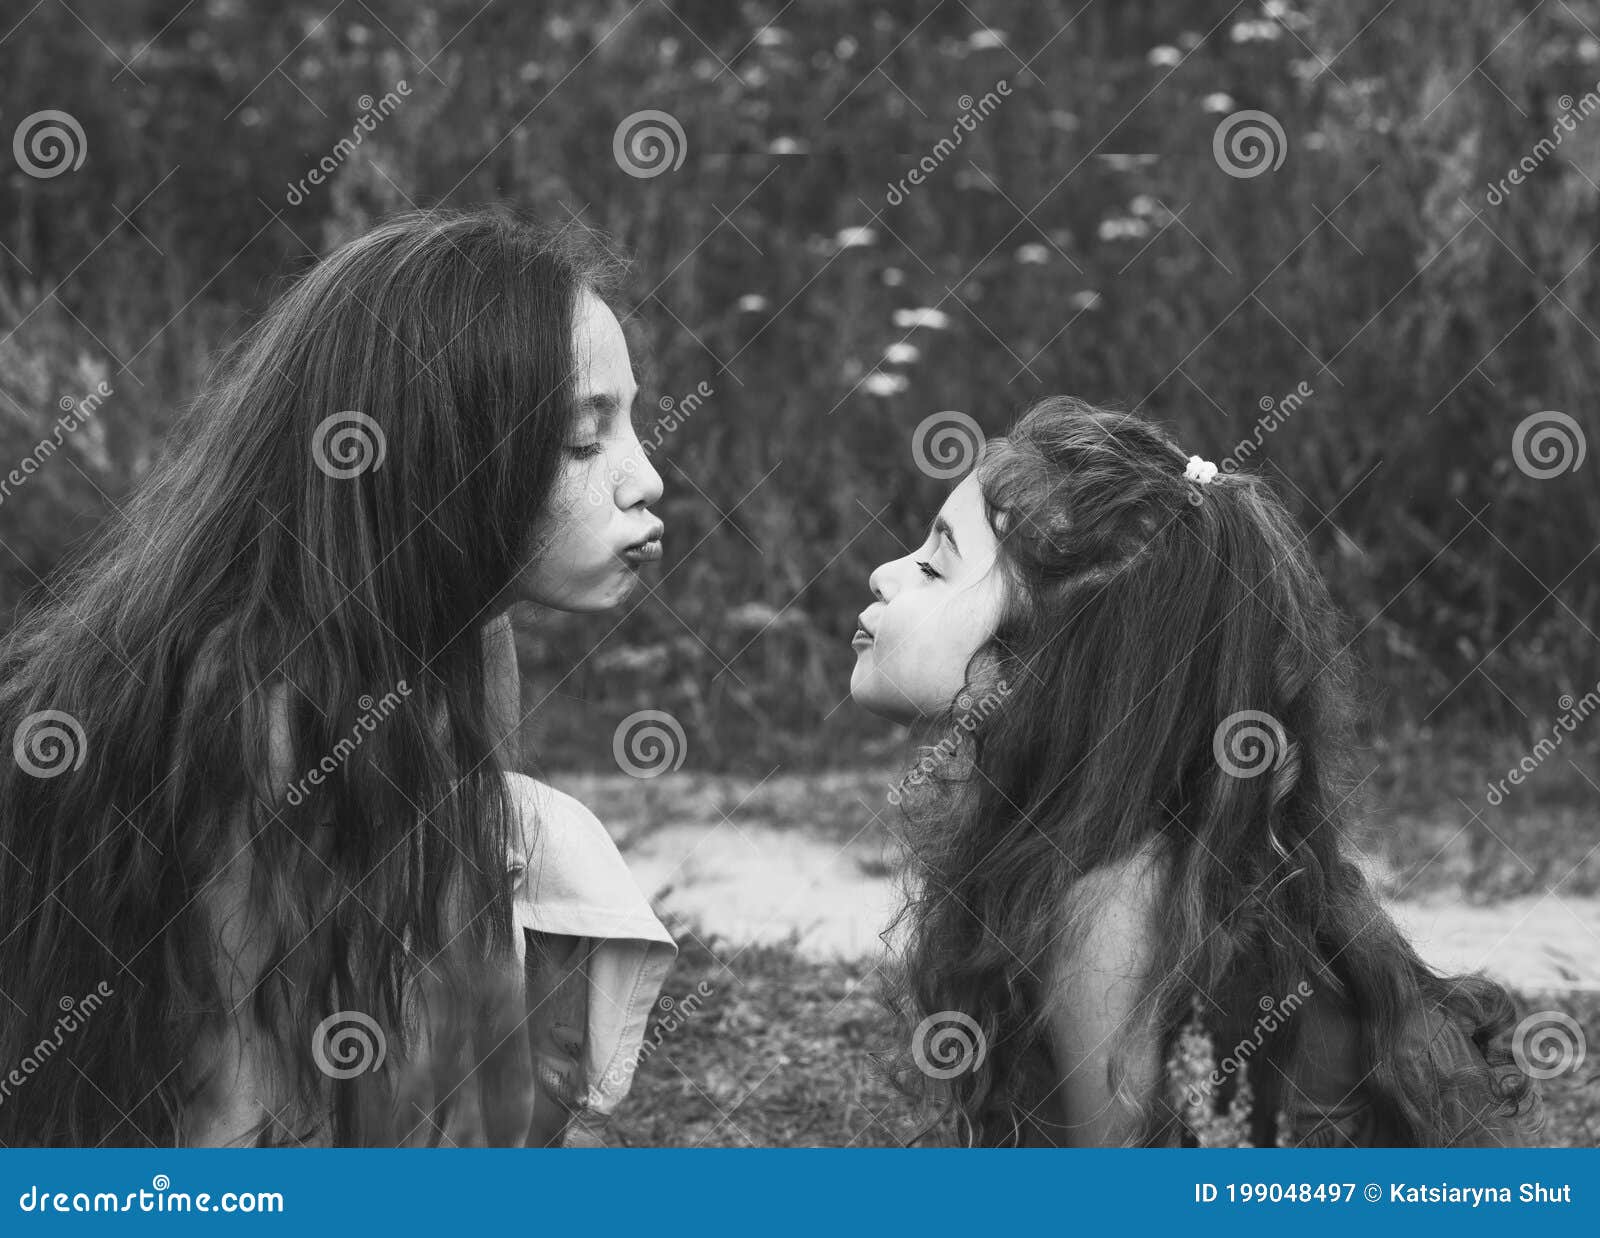 523 Two Little Kids Kissing Photos Free Royalty Free Stock Photos From Dreamstime